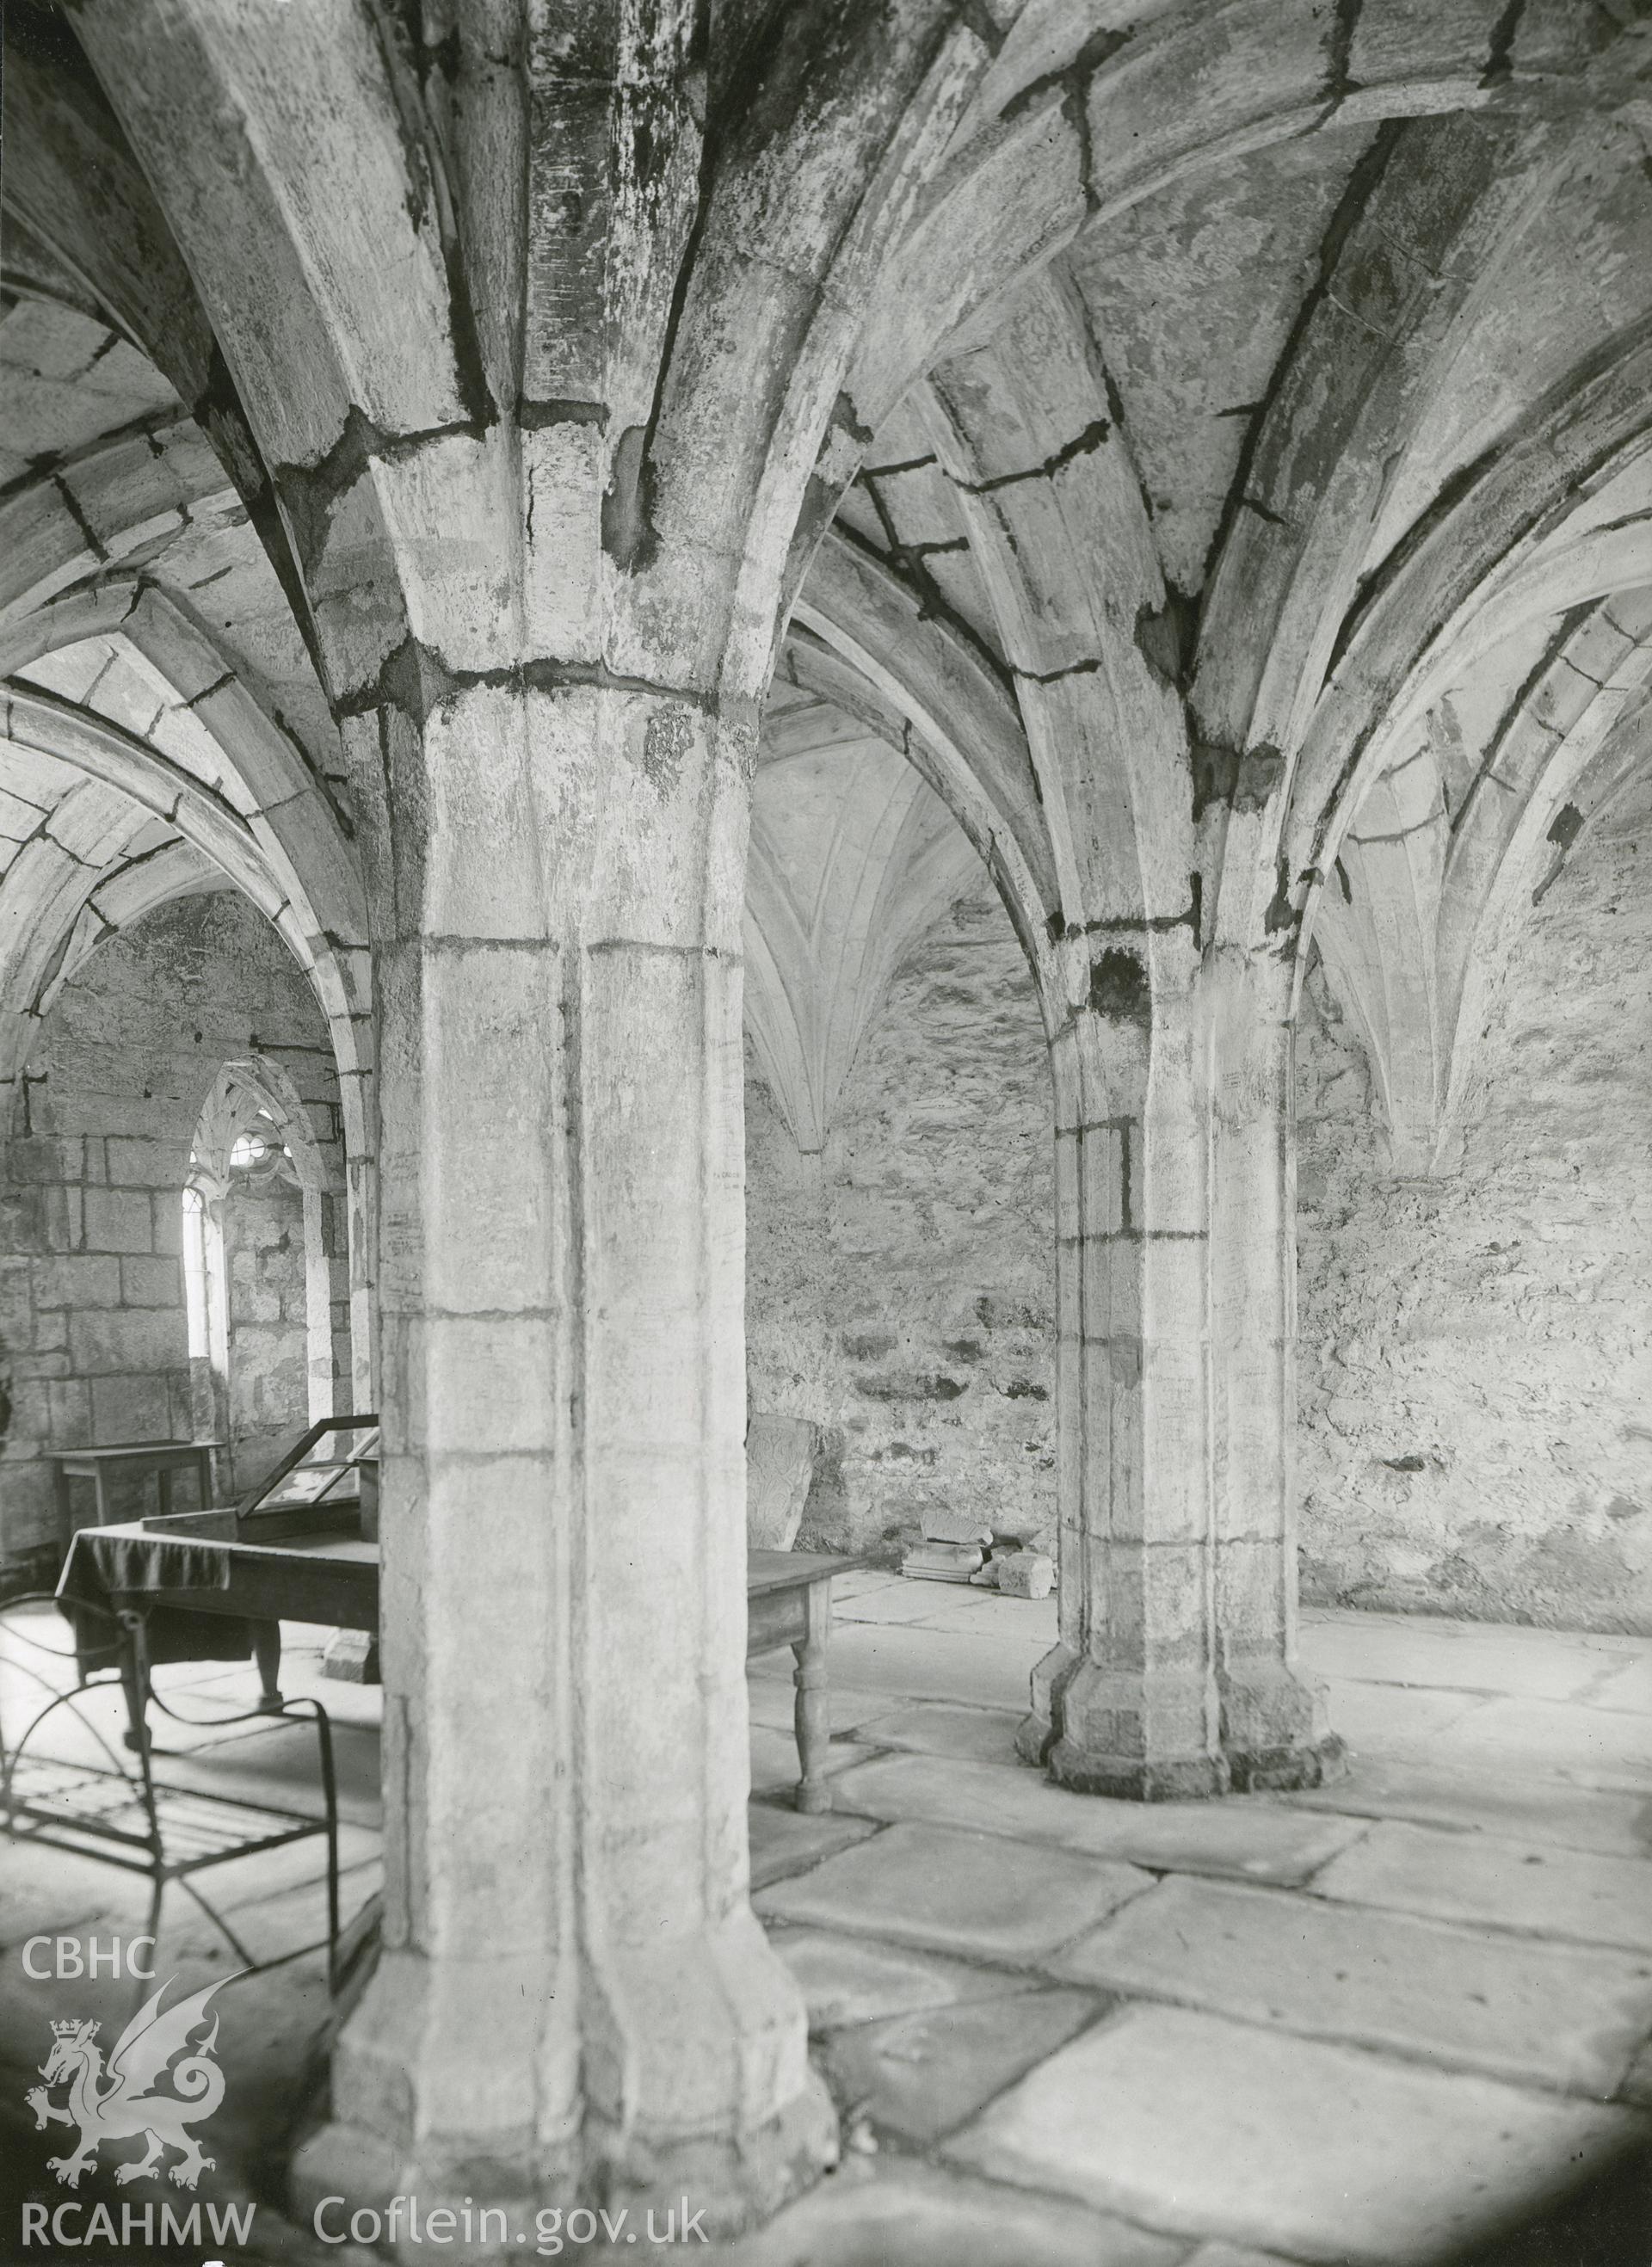 Digitised copy of a black and white photograph showing Chapter House at Valle Crucis Abbey taken by F.H. Crossley, 1948. Negative held by NMR England.